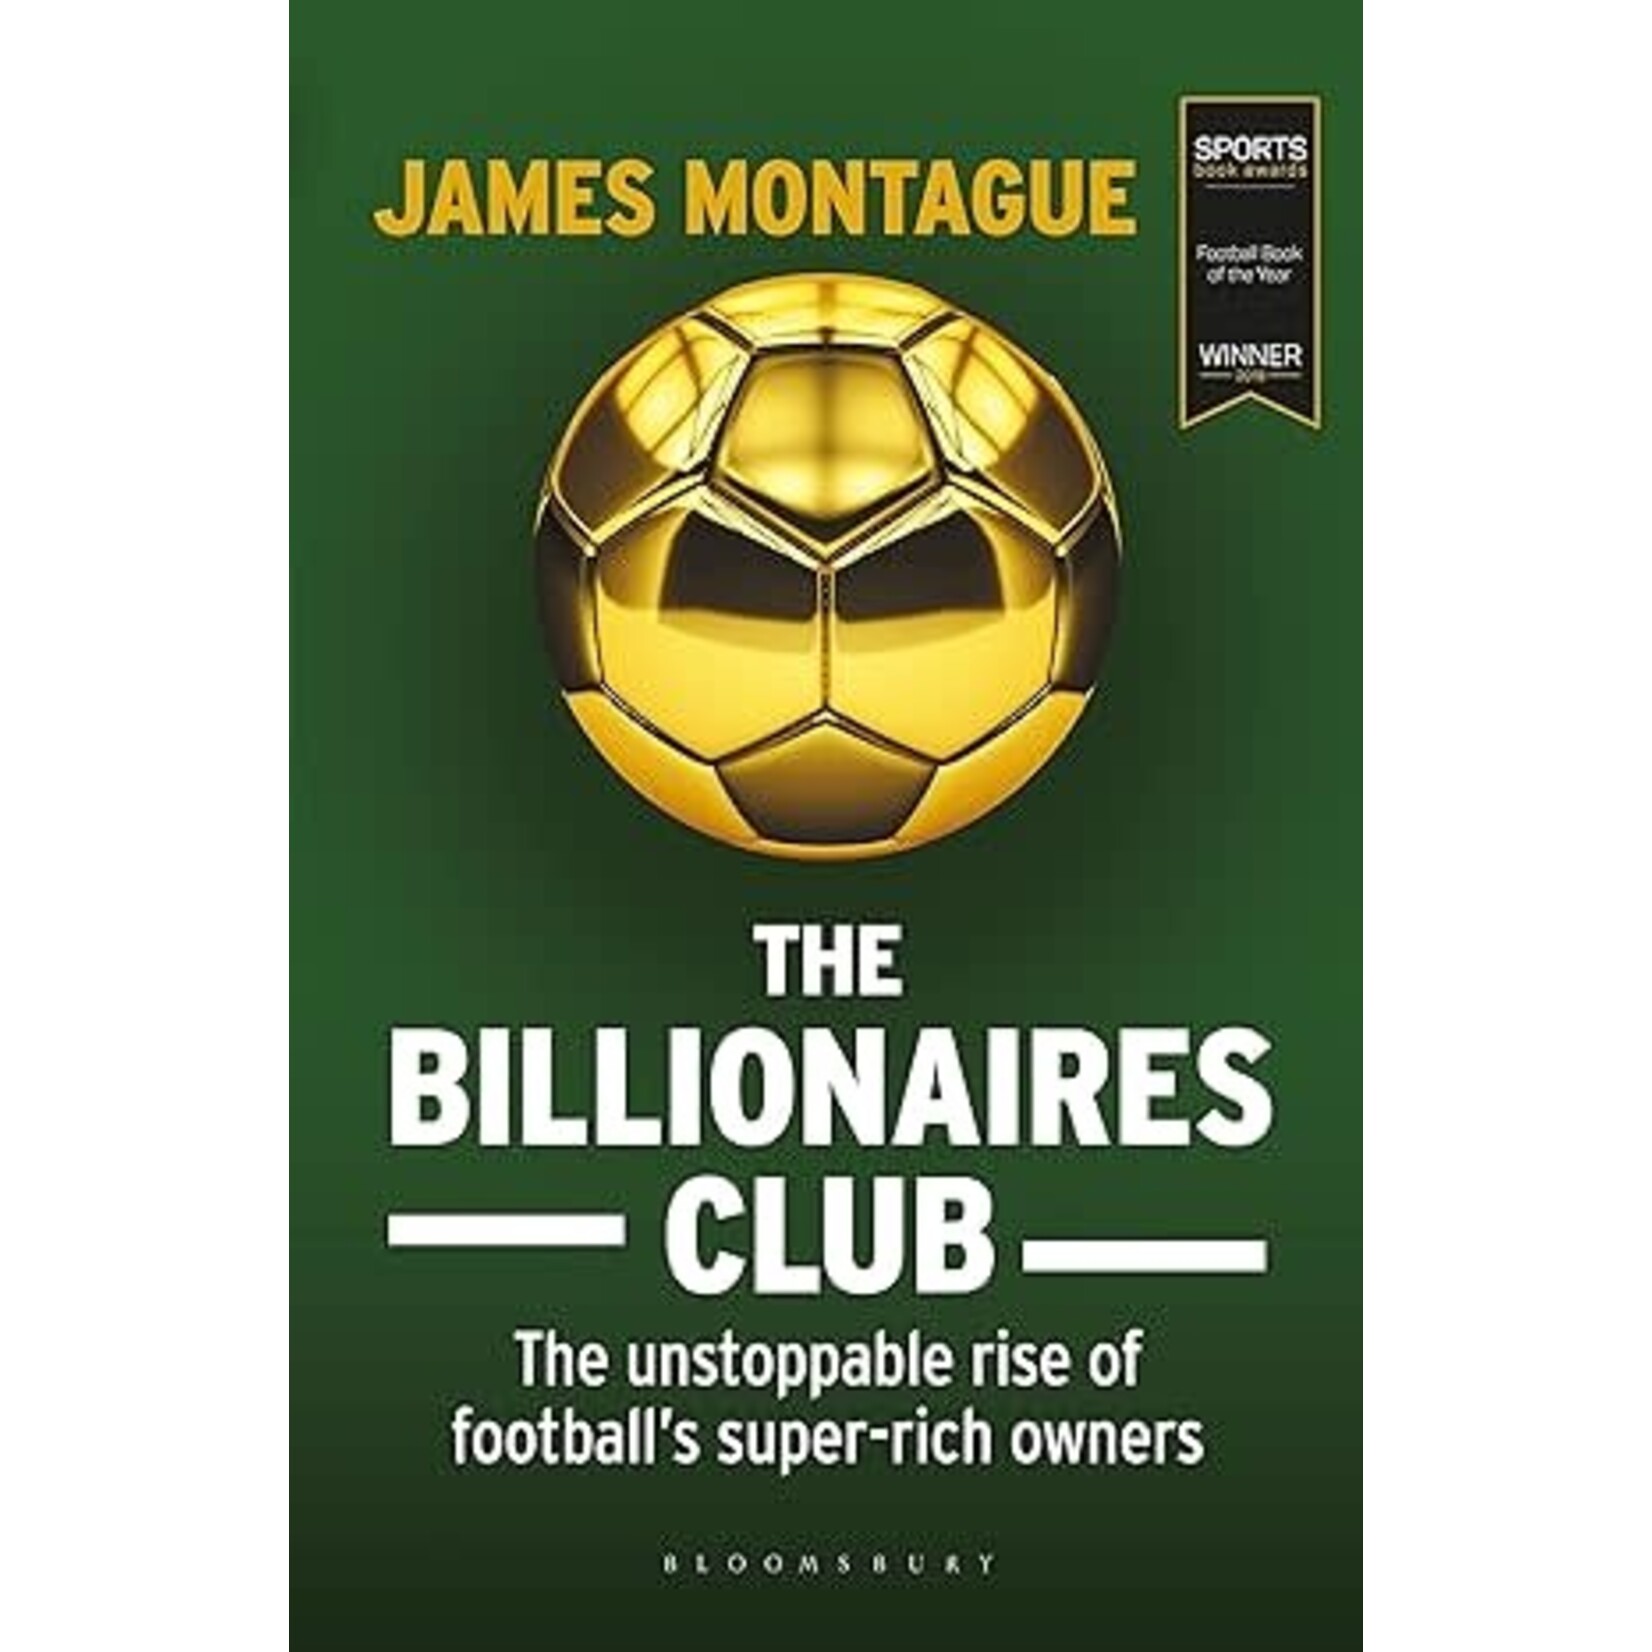 The Billionaires Club - The Unstoppable Rise Of Football's Super-Rich Owners